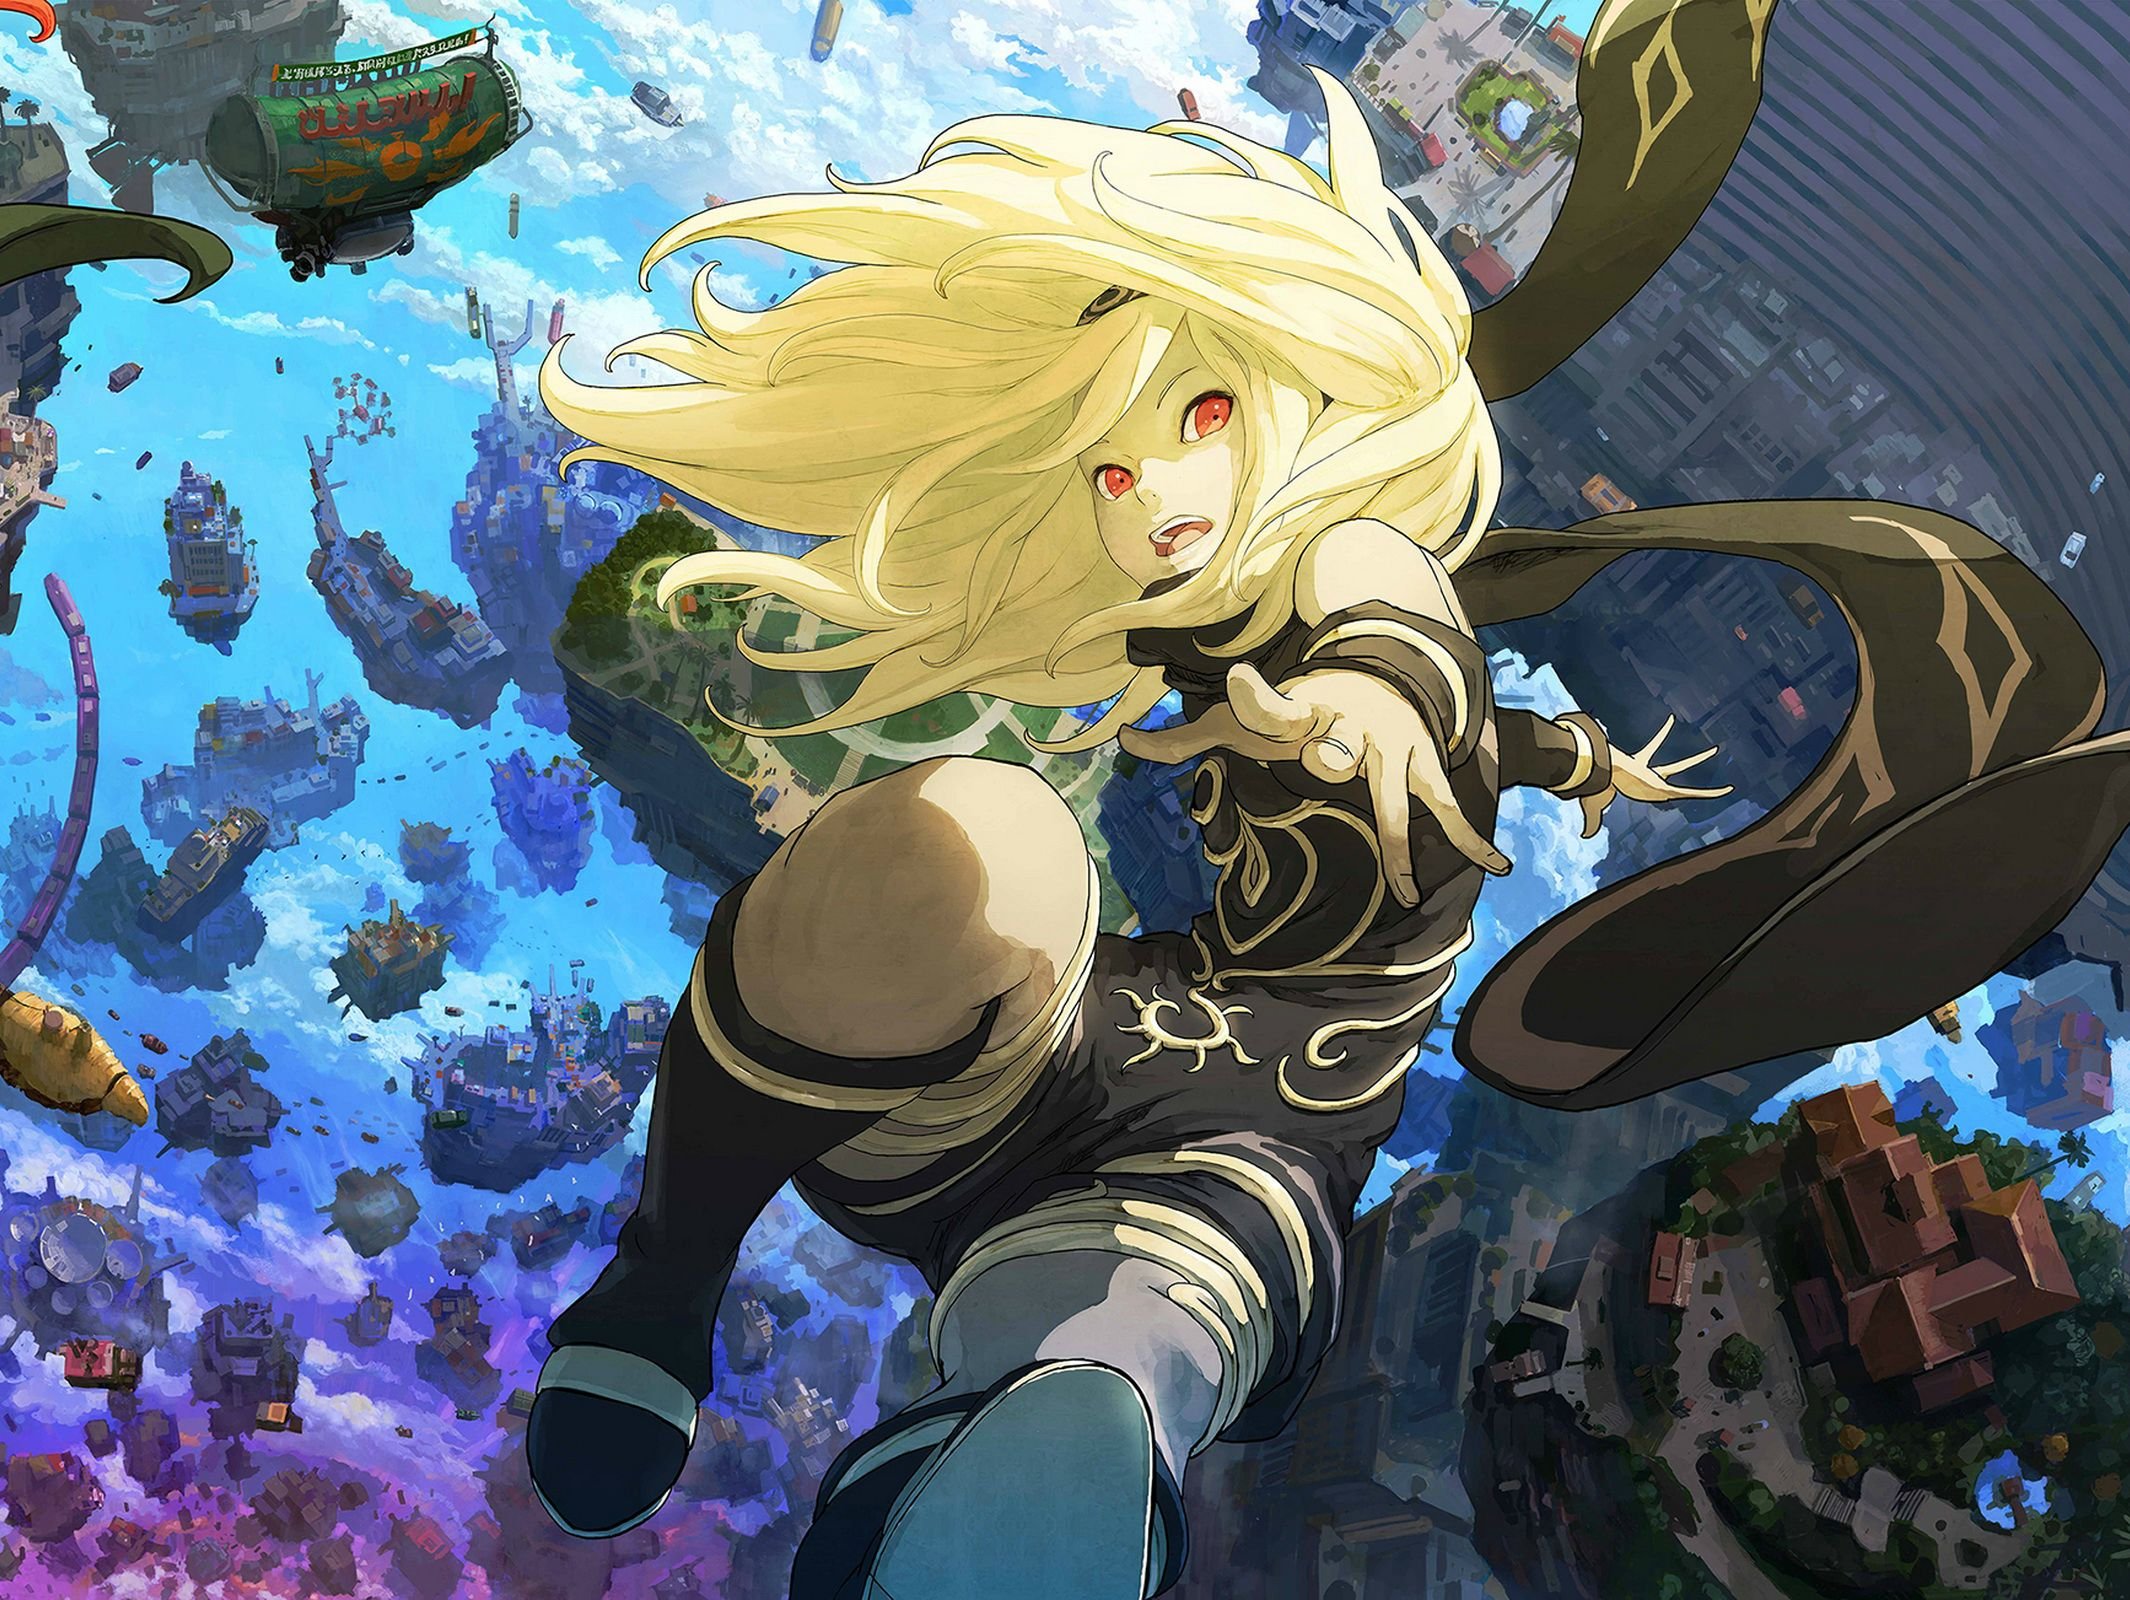 A man devoted to Gravity Rush/Daze. There is nothing as perfect as Gravity Rush. I also love smt, Persona, And Idolm@ster.